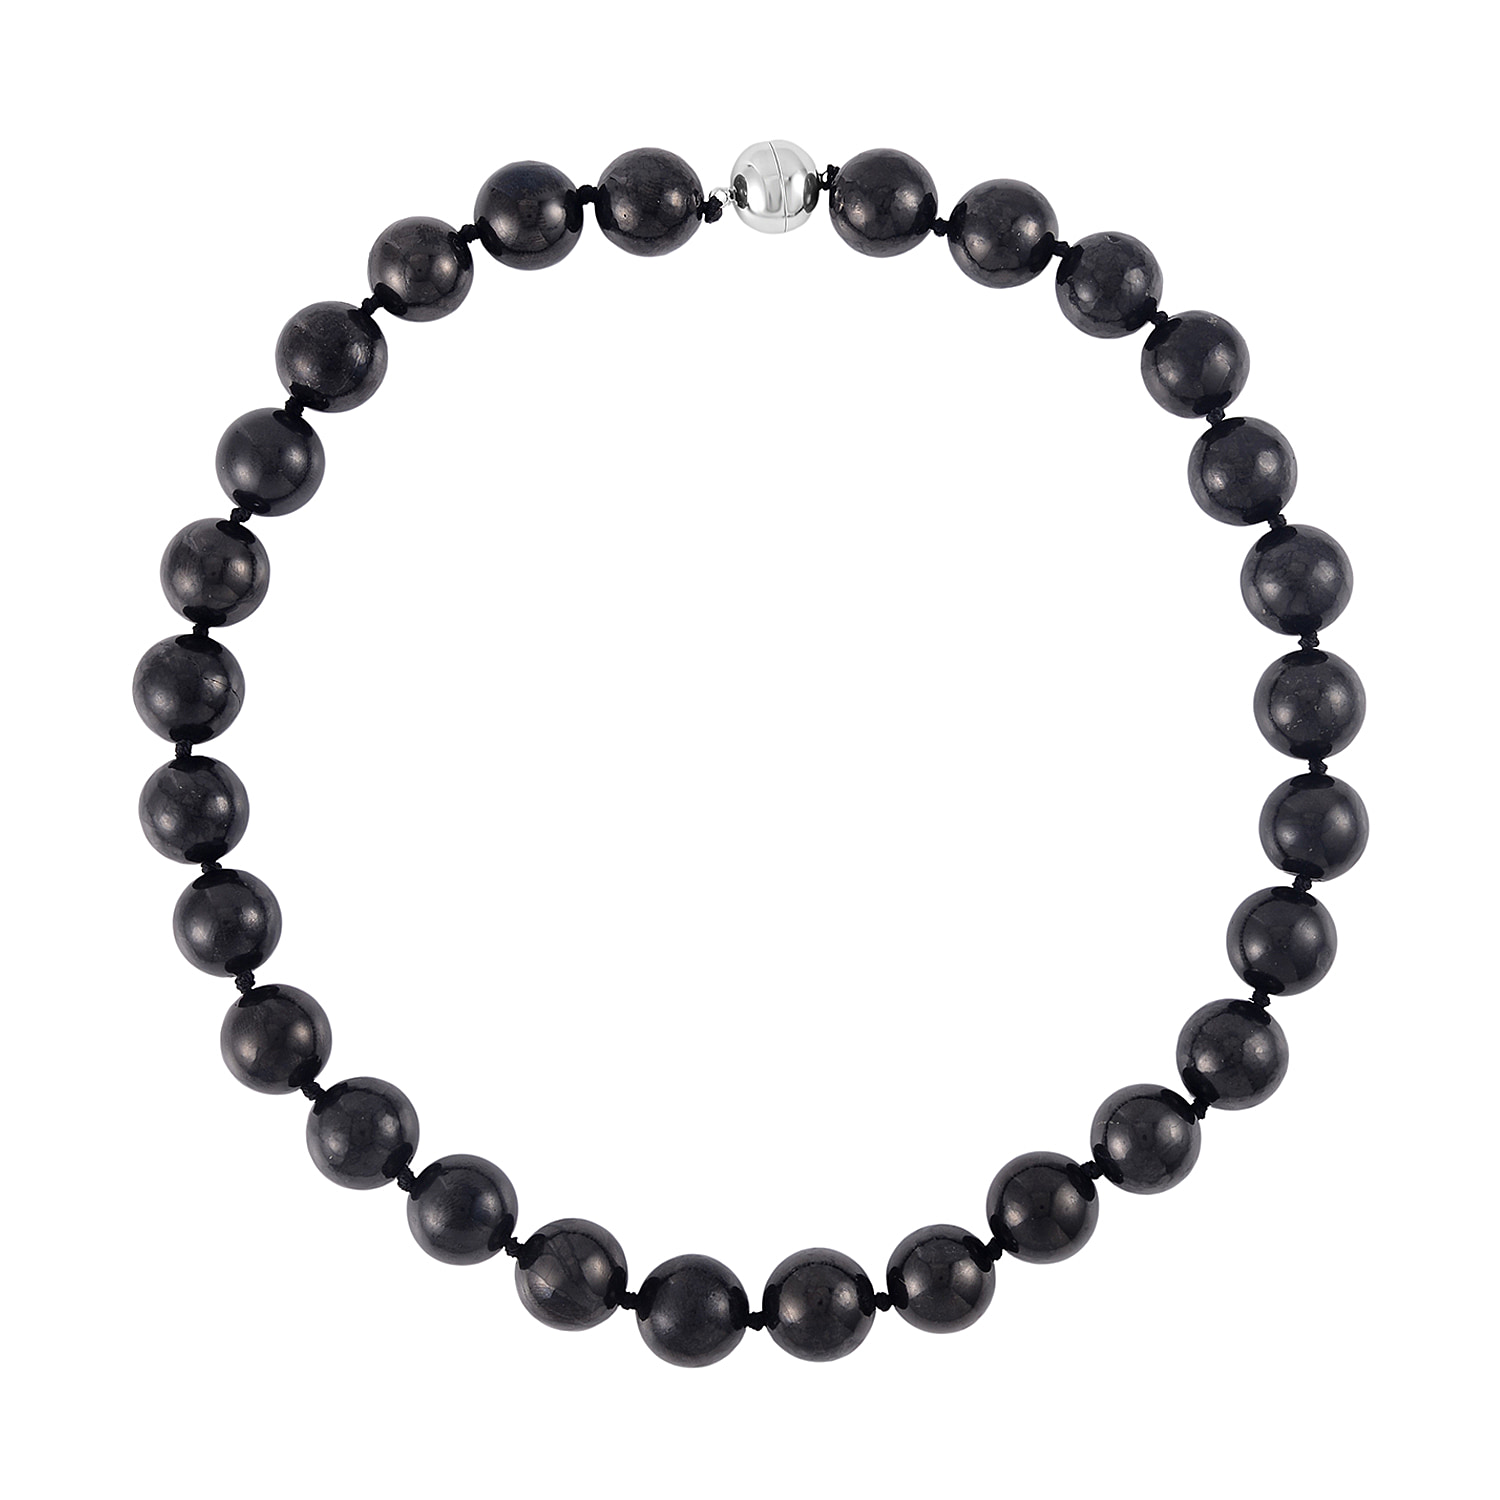 Shungite Beads Necklace (Size - 20) in Rhodium Overlay Sterling Silver  367.00 Ct.